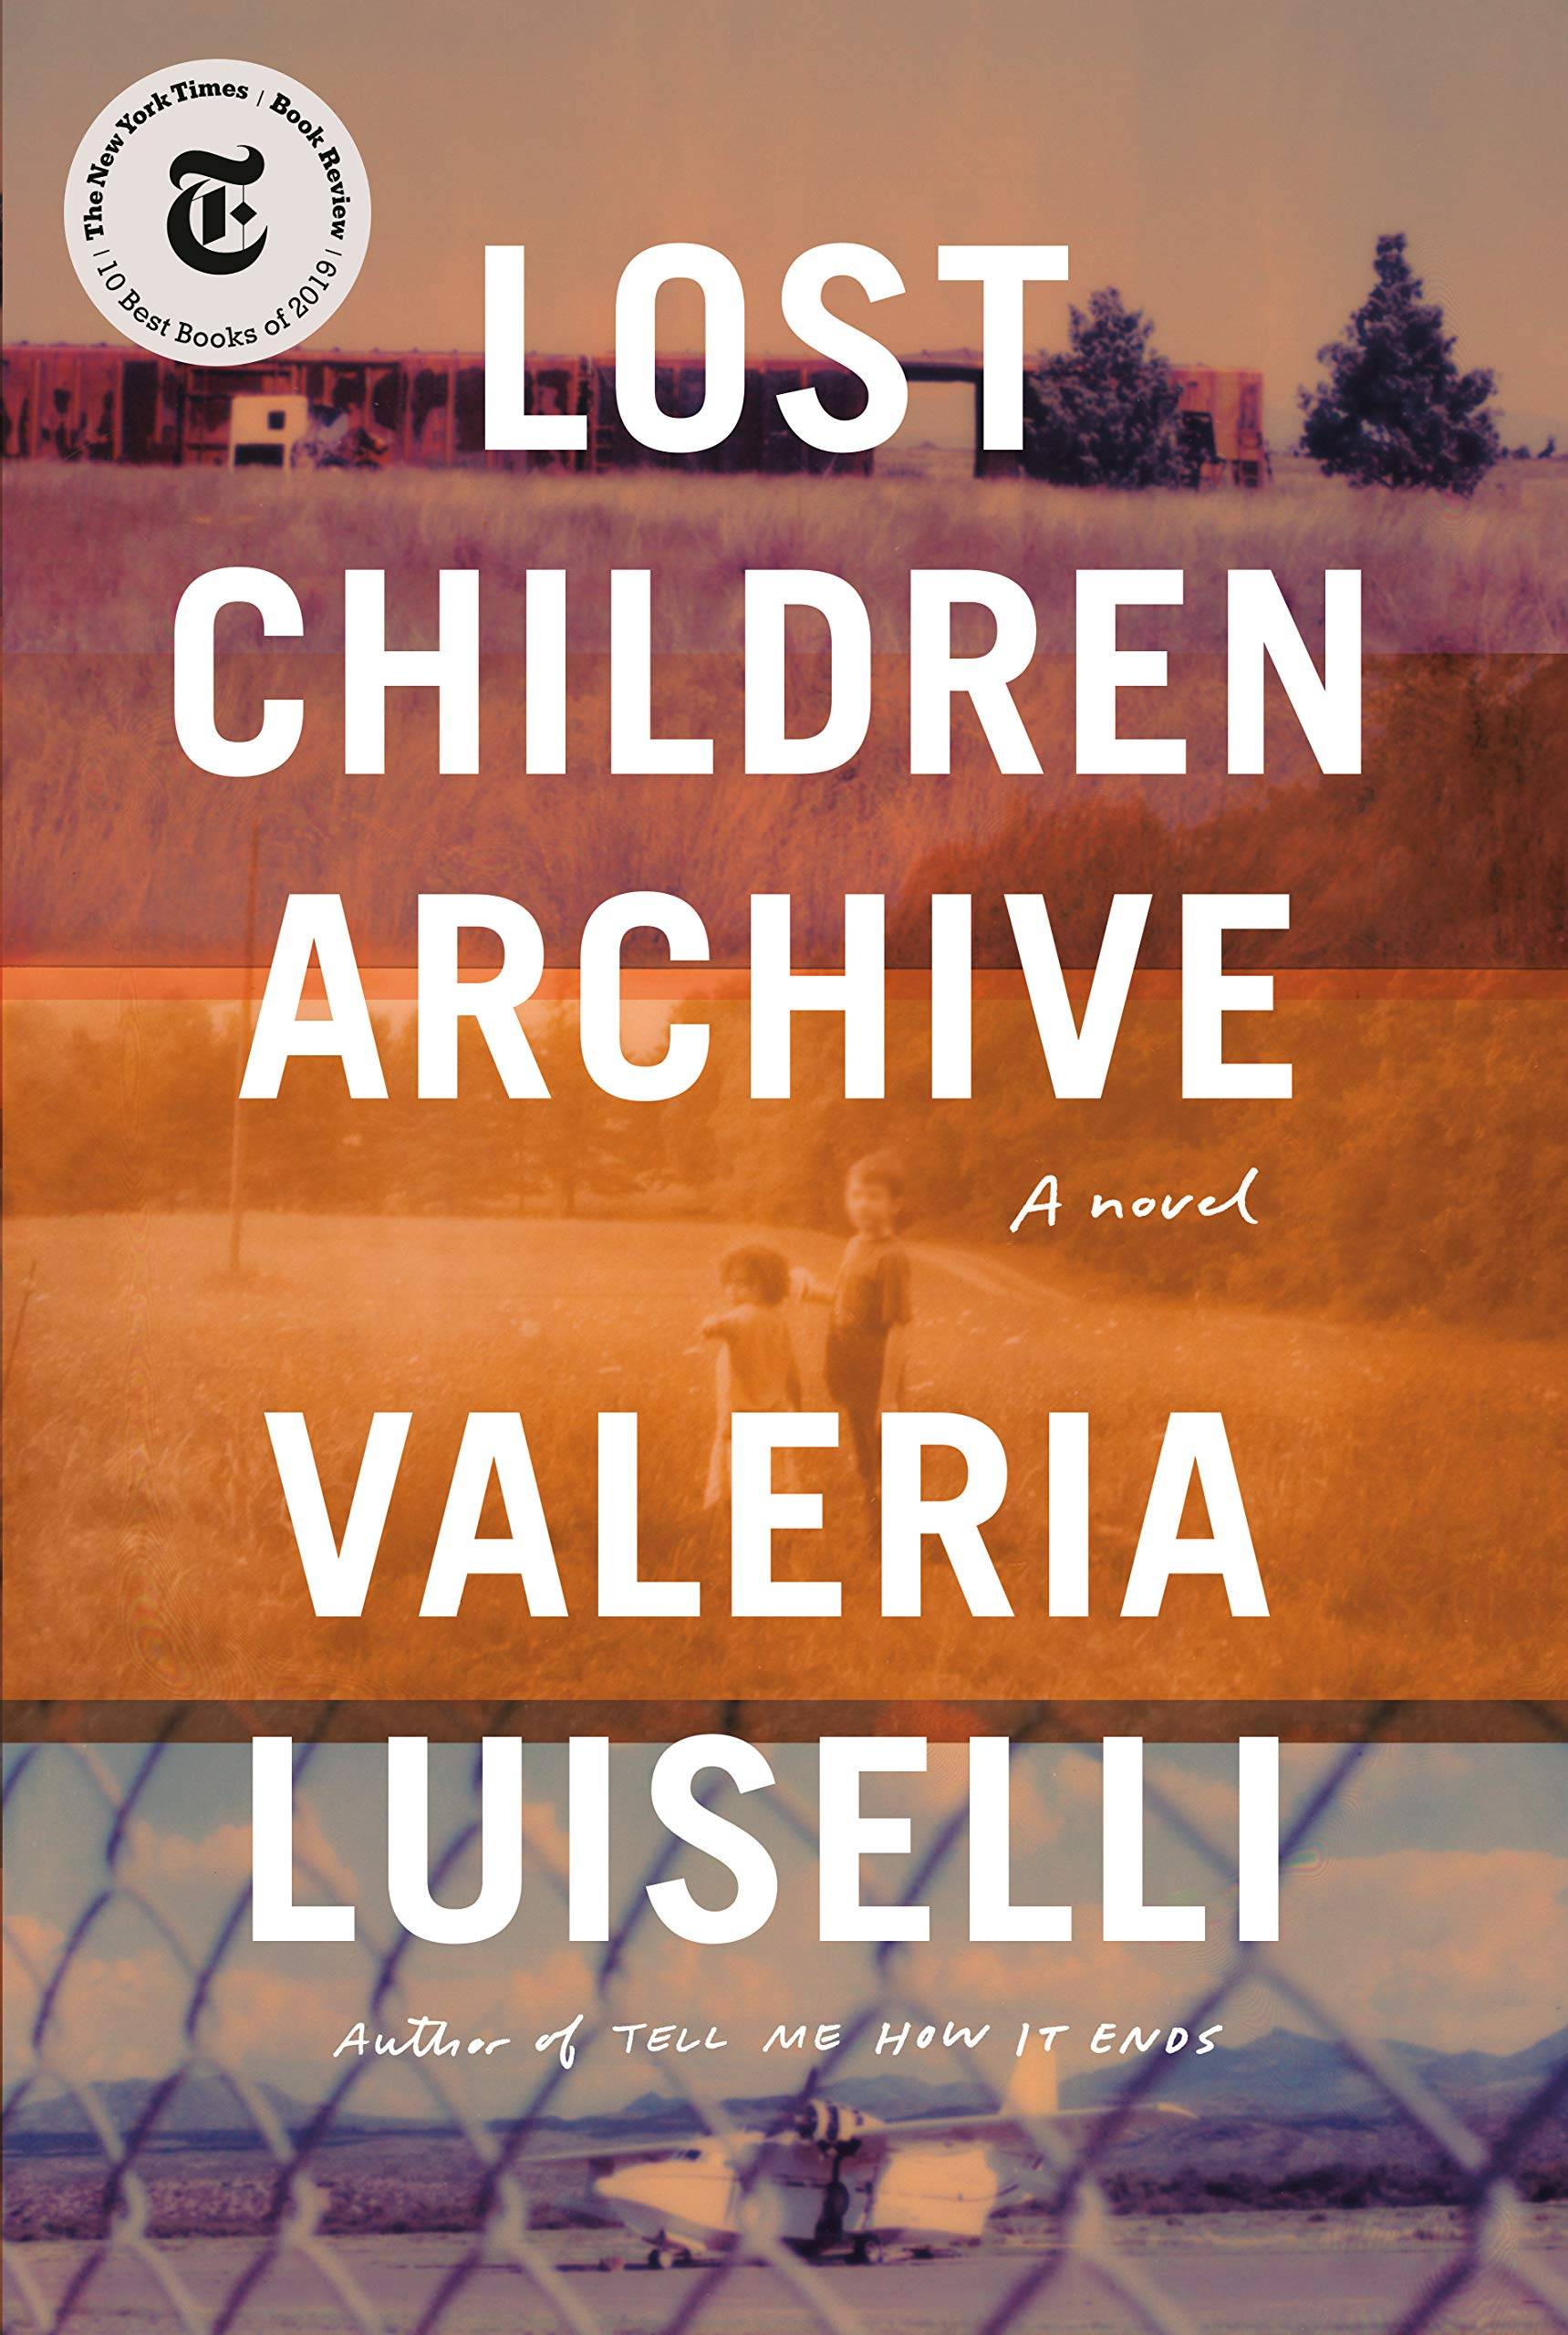 "lost children archive" cover featuring vintage photos of two children, an airplane, and a building in the distance.